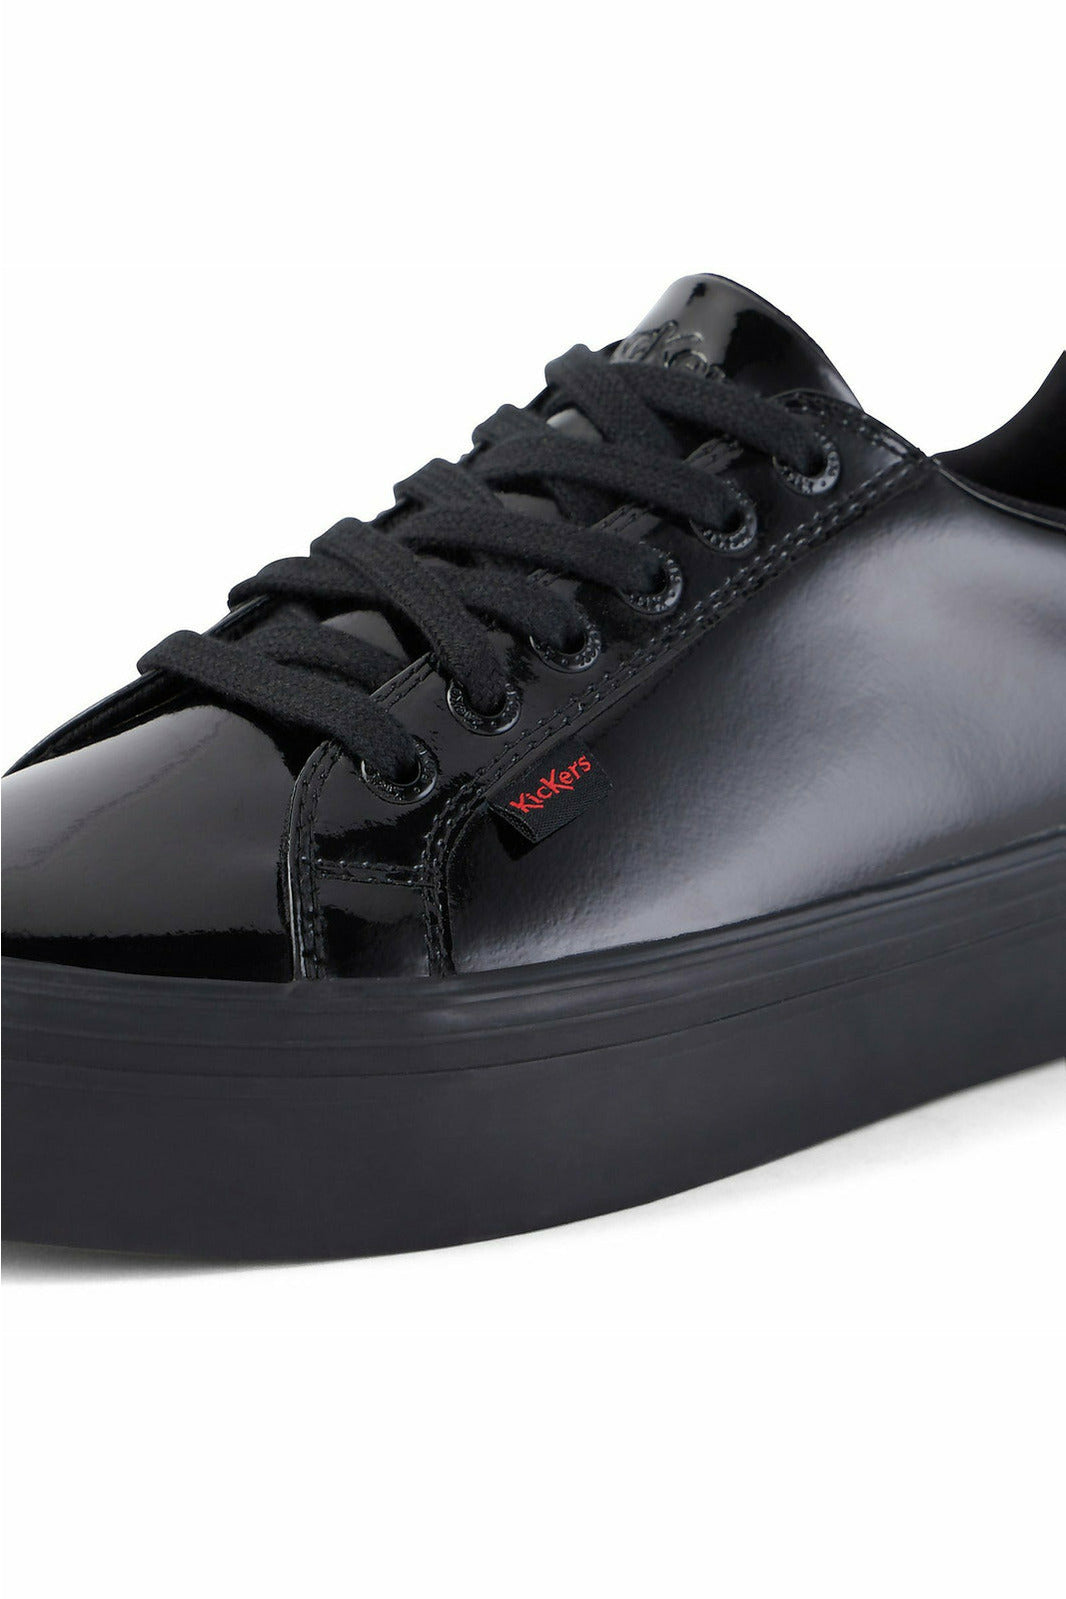 Kickers Tovni Stack Black Patent at Meeks Shoes